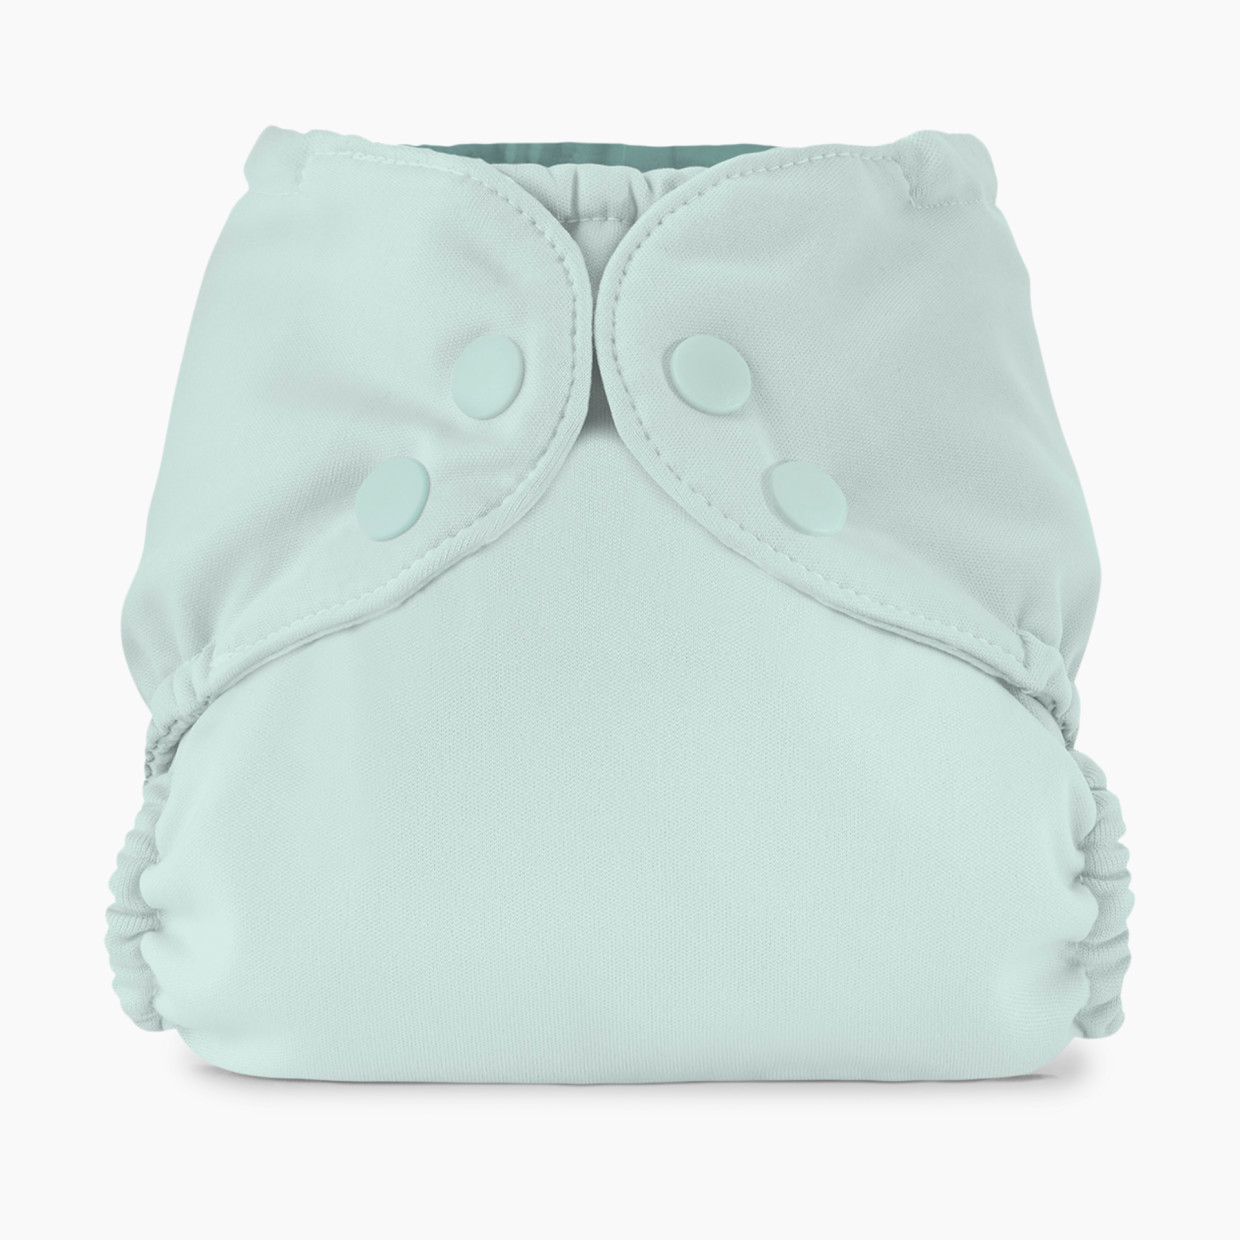 Esembly Recycled Diaper Cover (Outer) + Swim Diaper - Mist, Size 2 (18-35 Lbs).